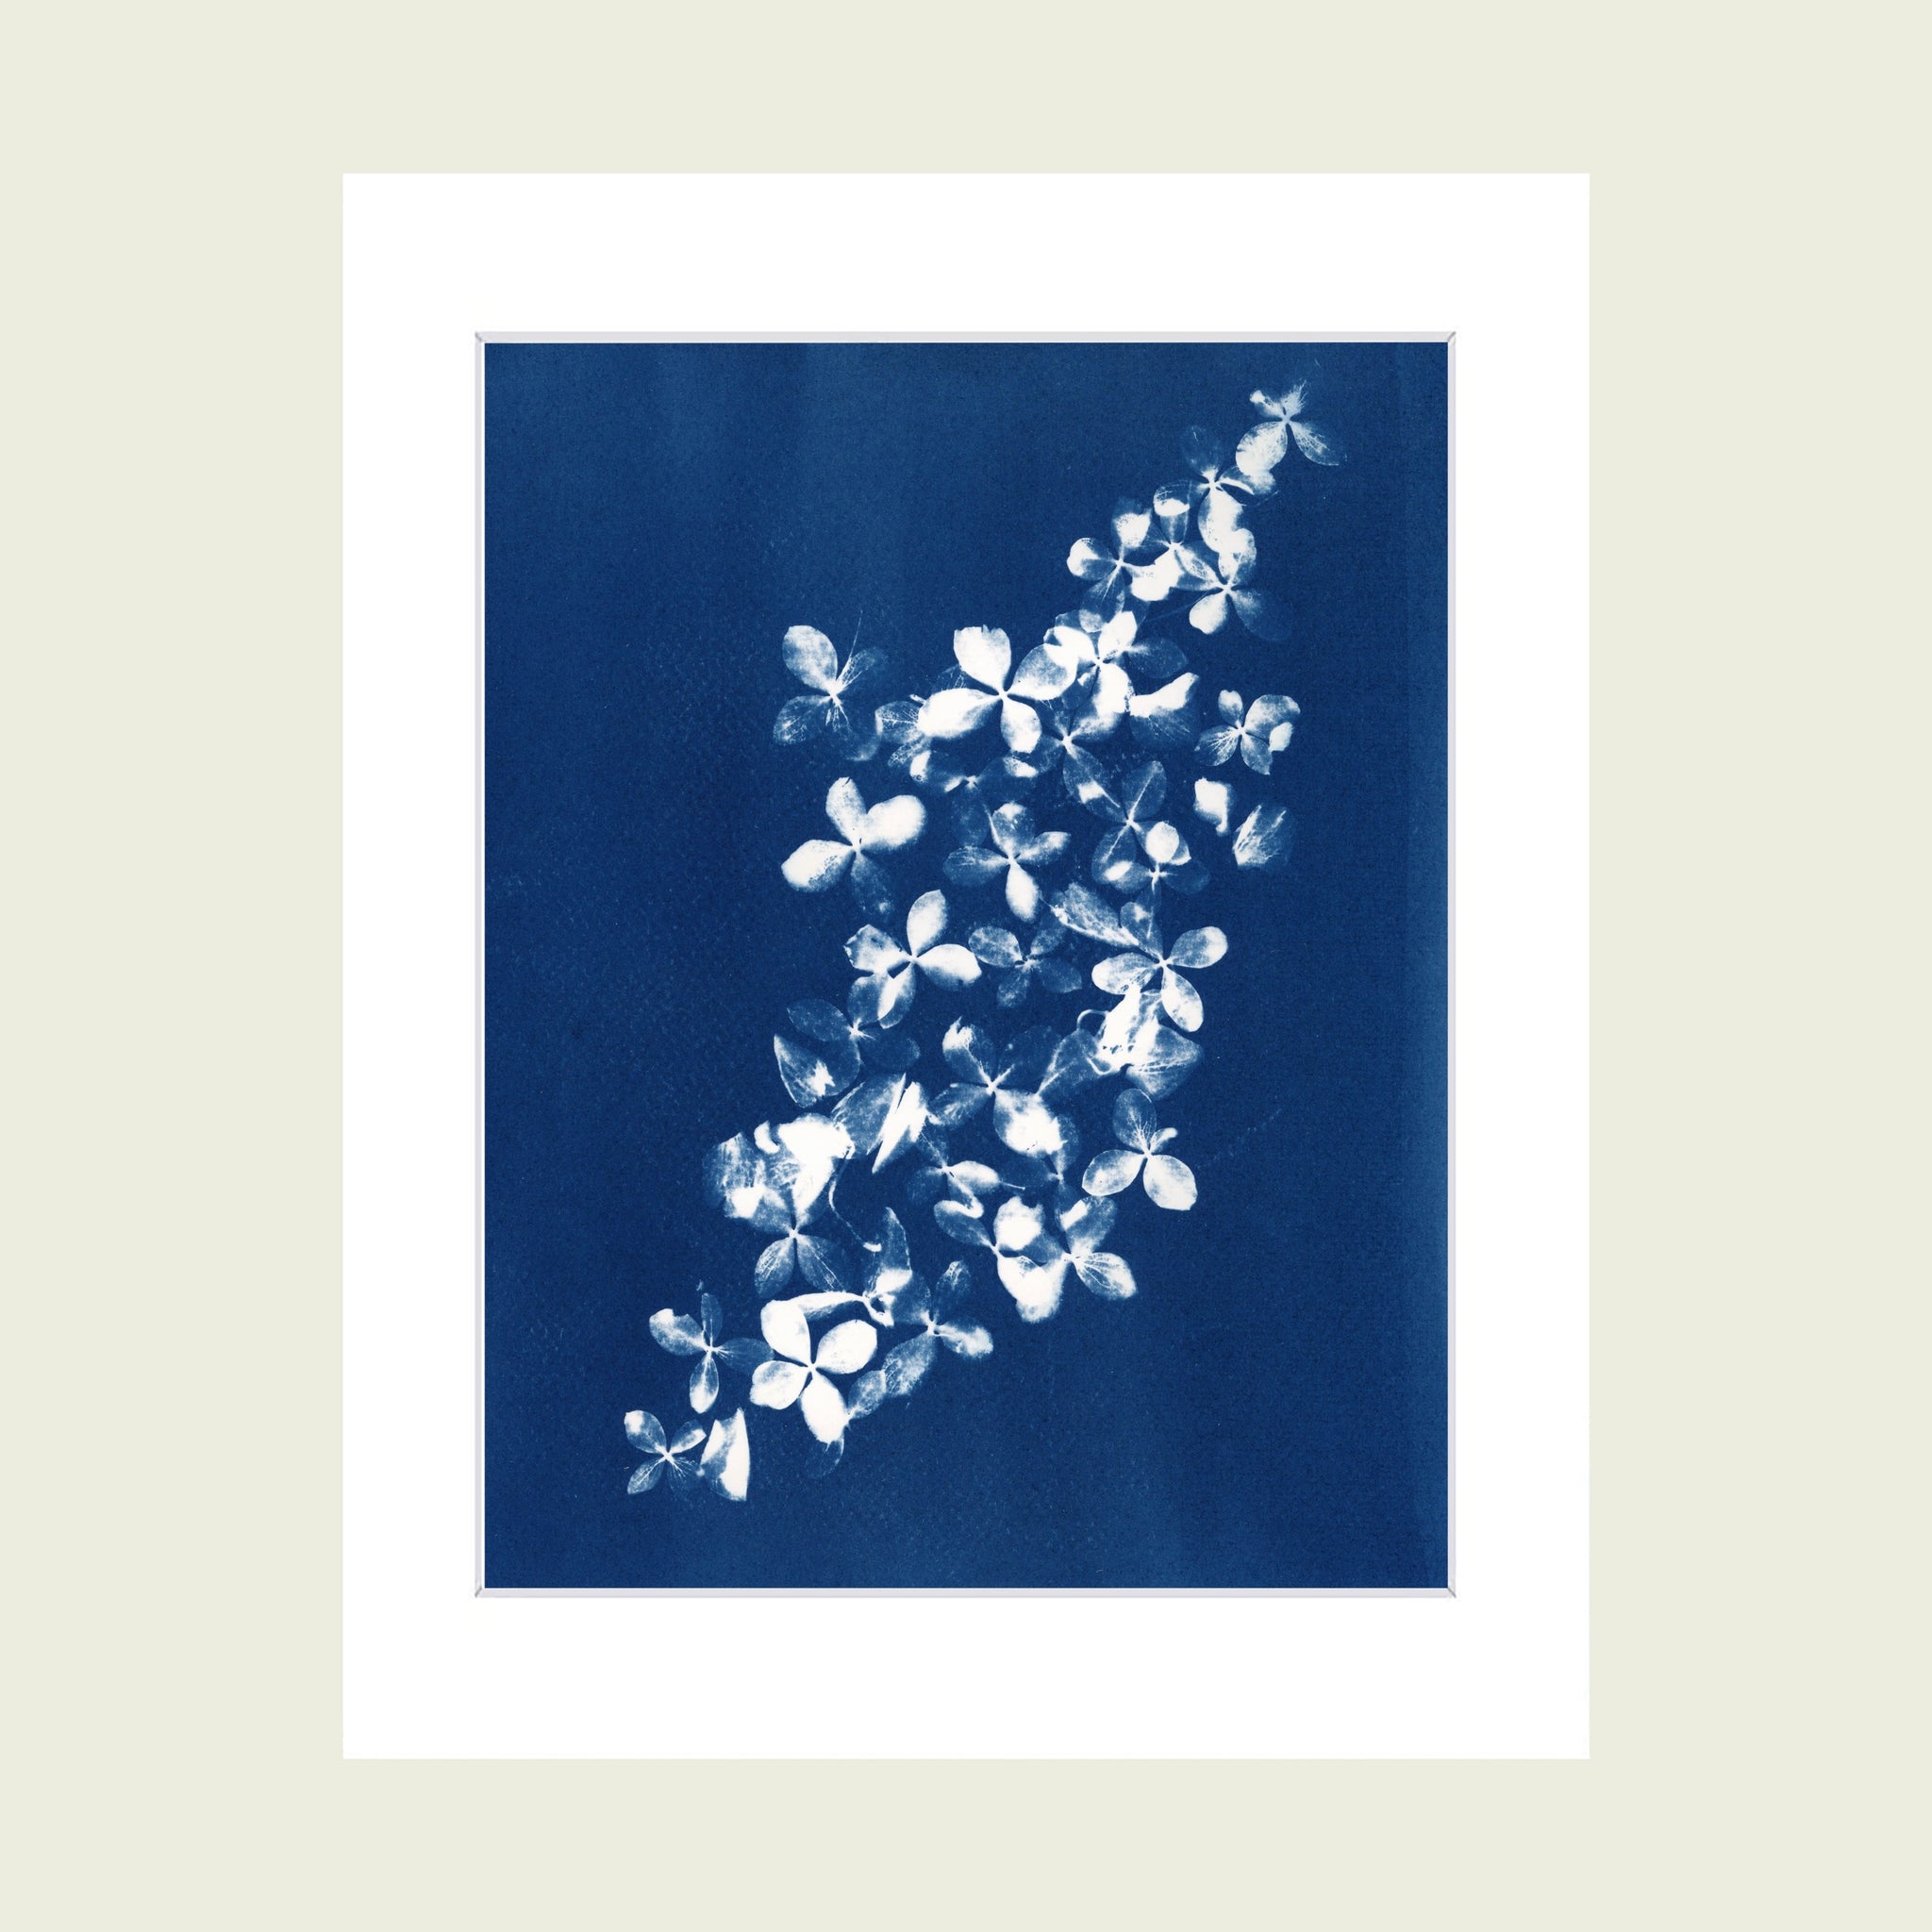 Prussian blue cyanotype art print made with dried hydrangea petals